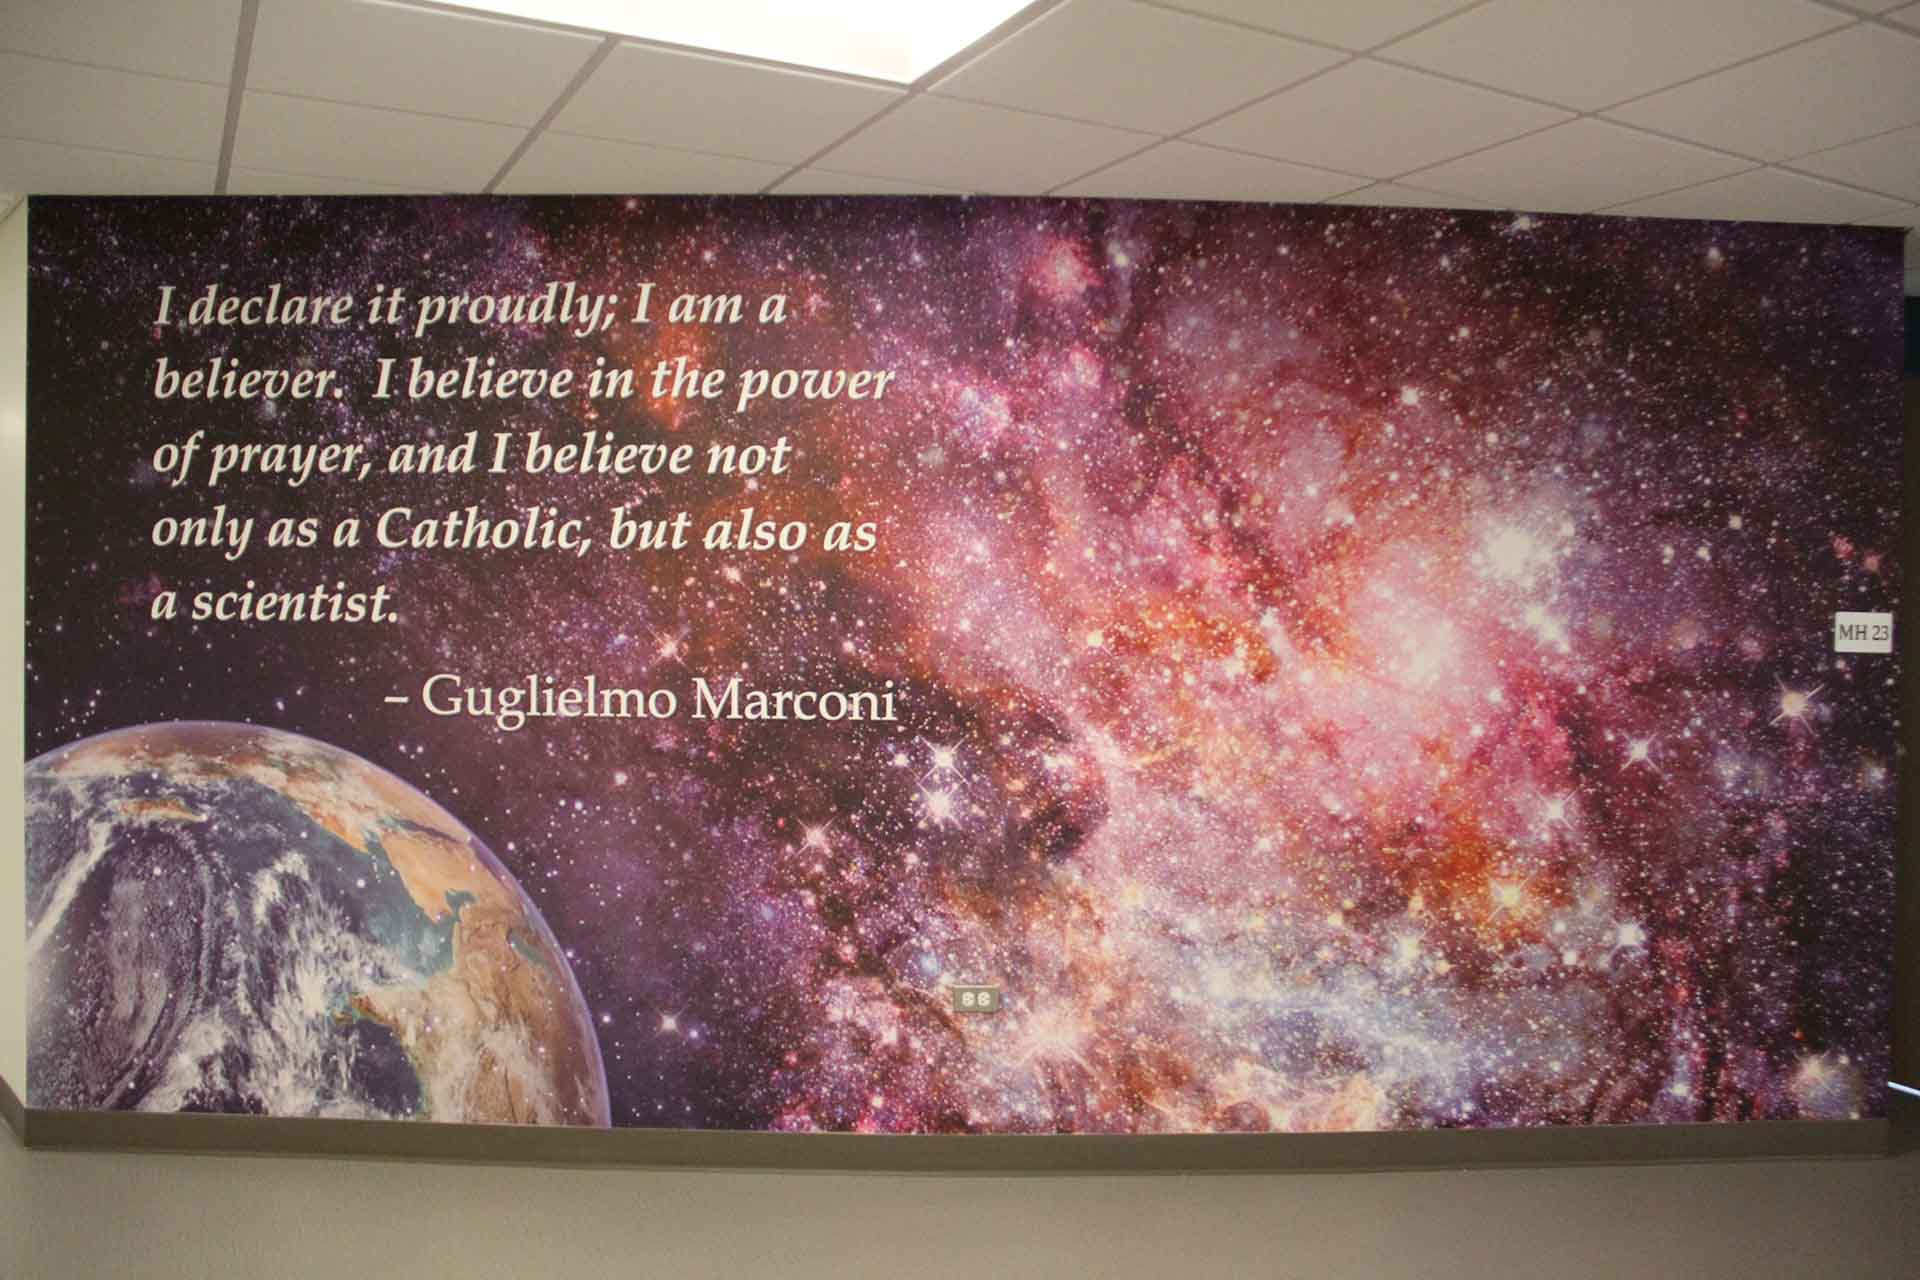 marist-science-wing-banner-with-quote-by-marconi